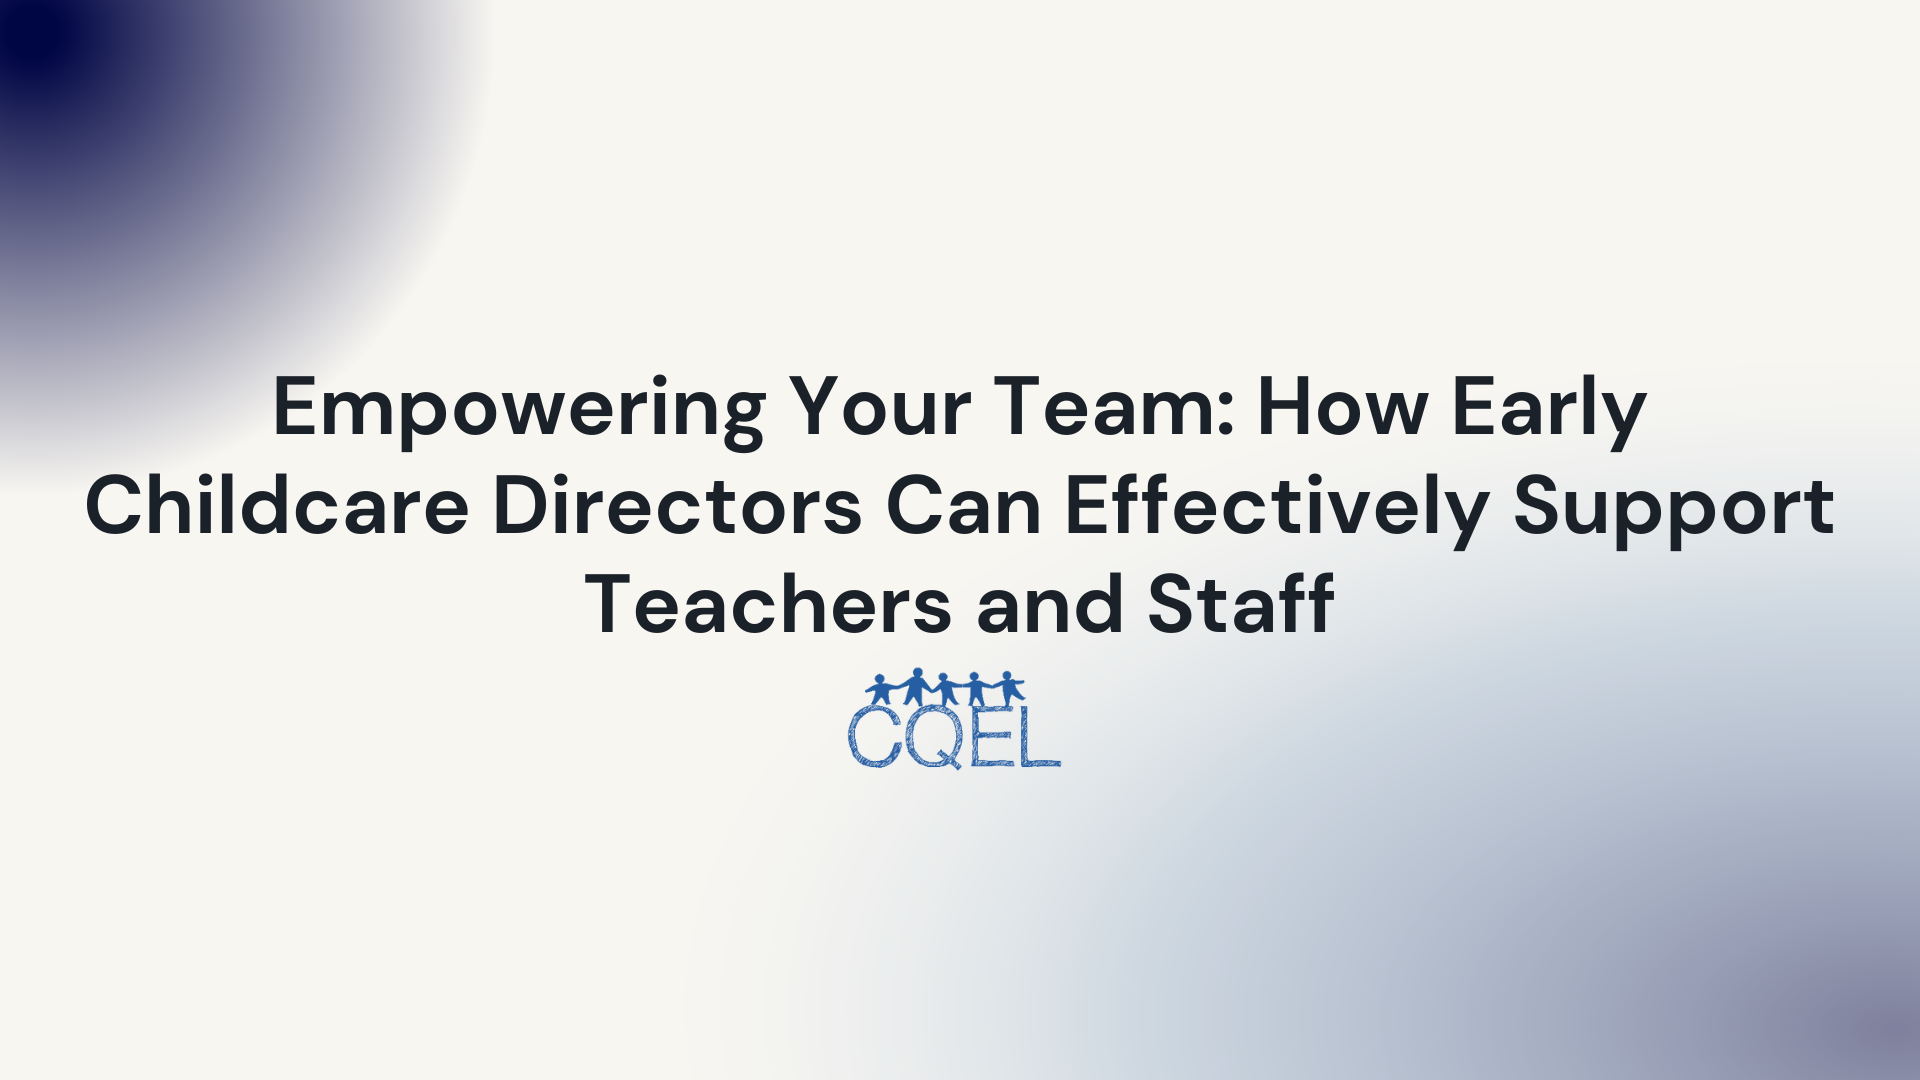 Empowering Your Team: How Early Childcare Directors Can Effectively Support Teachers and Staff